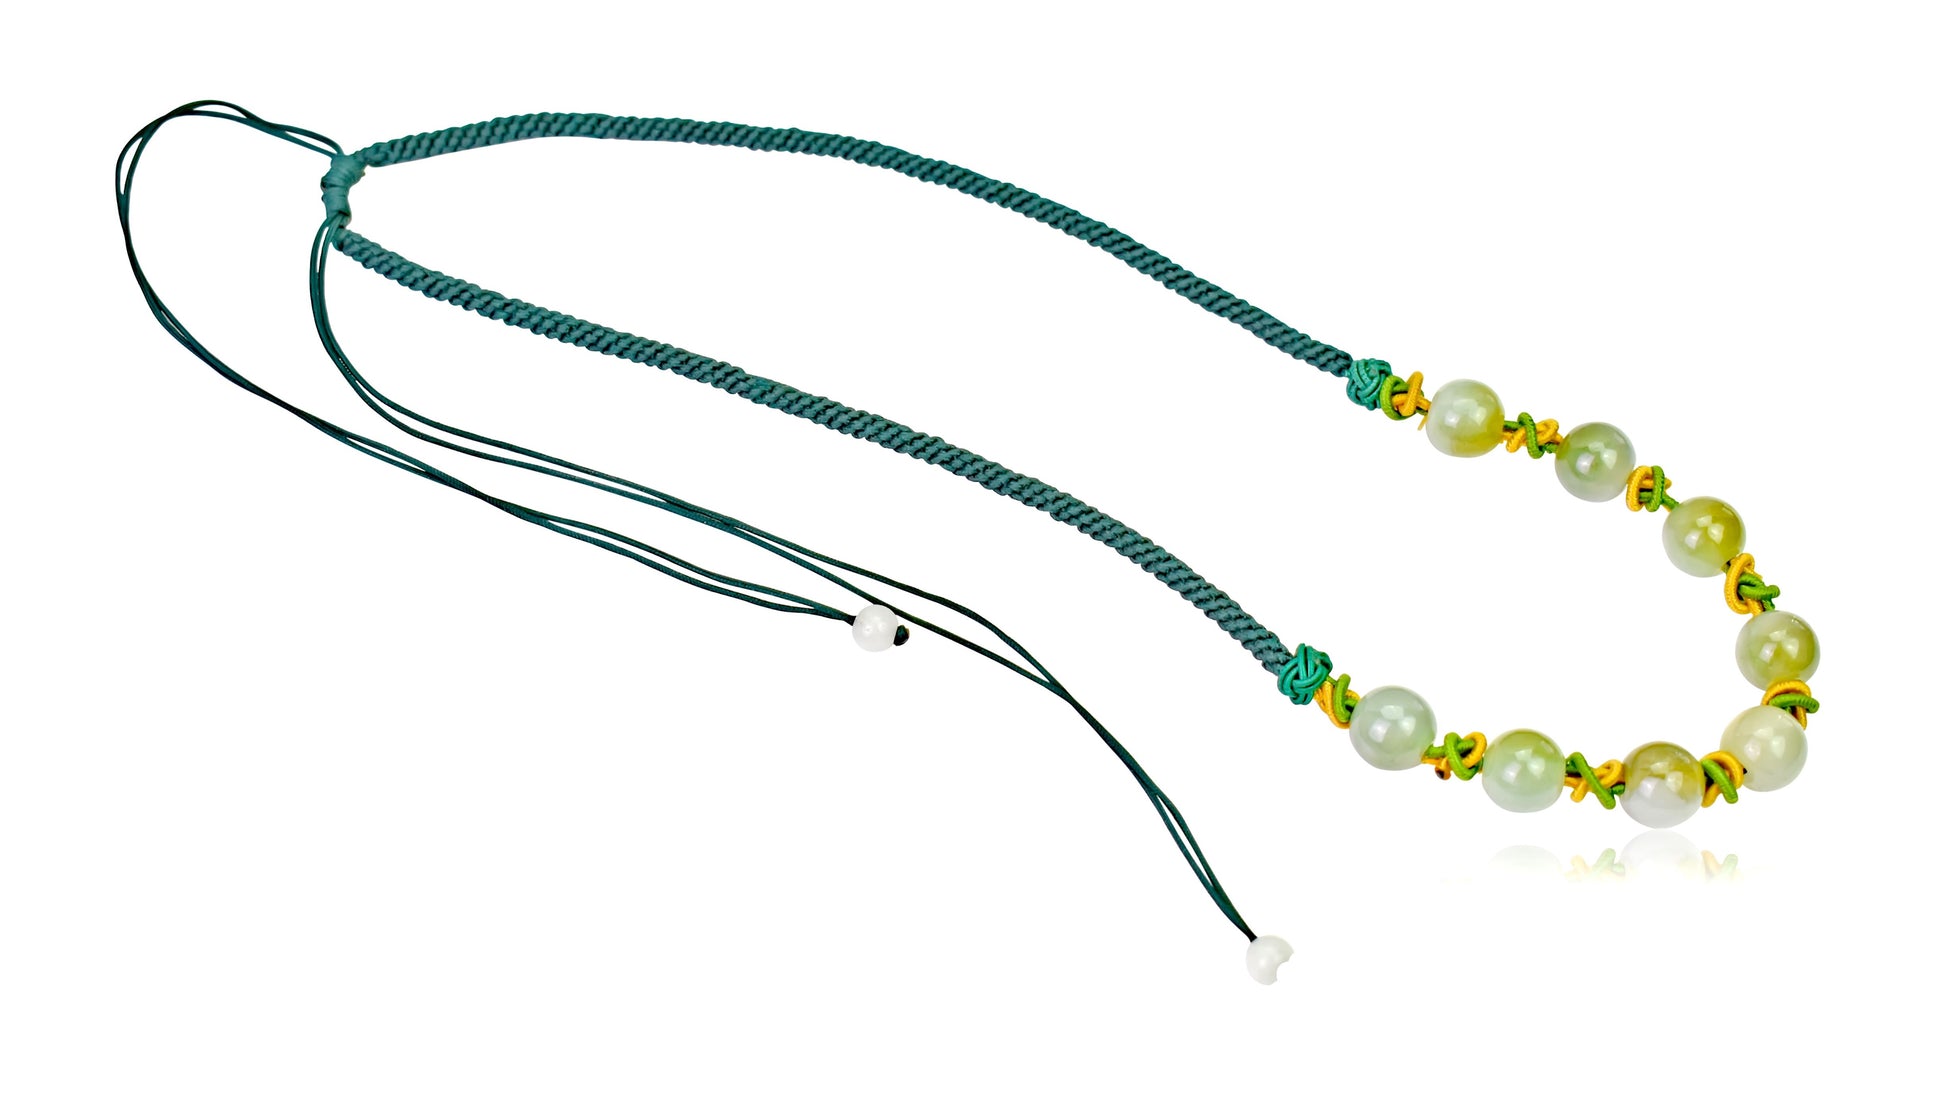 Get Closer to Nature with the PI Symbol and Jade Beads Necklace made with Green Cord